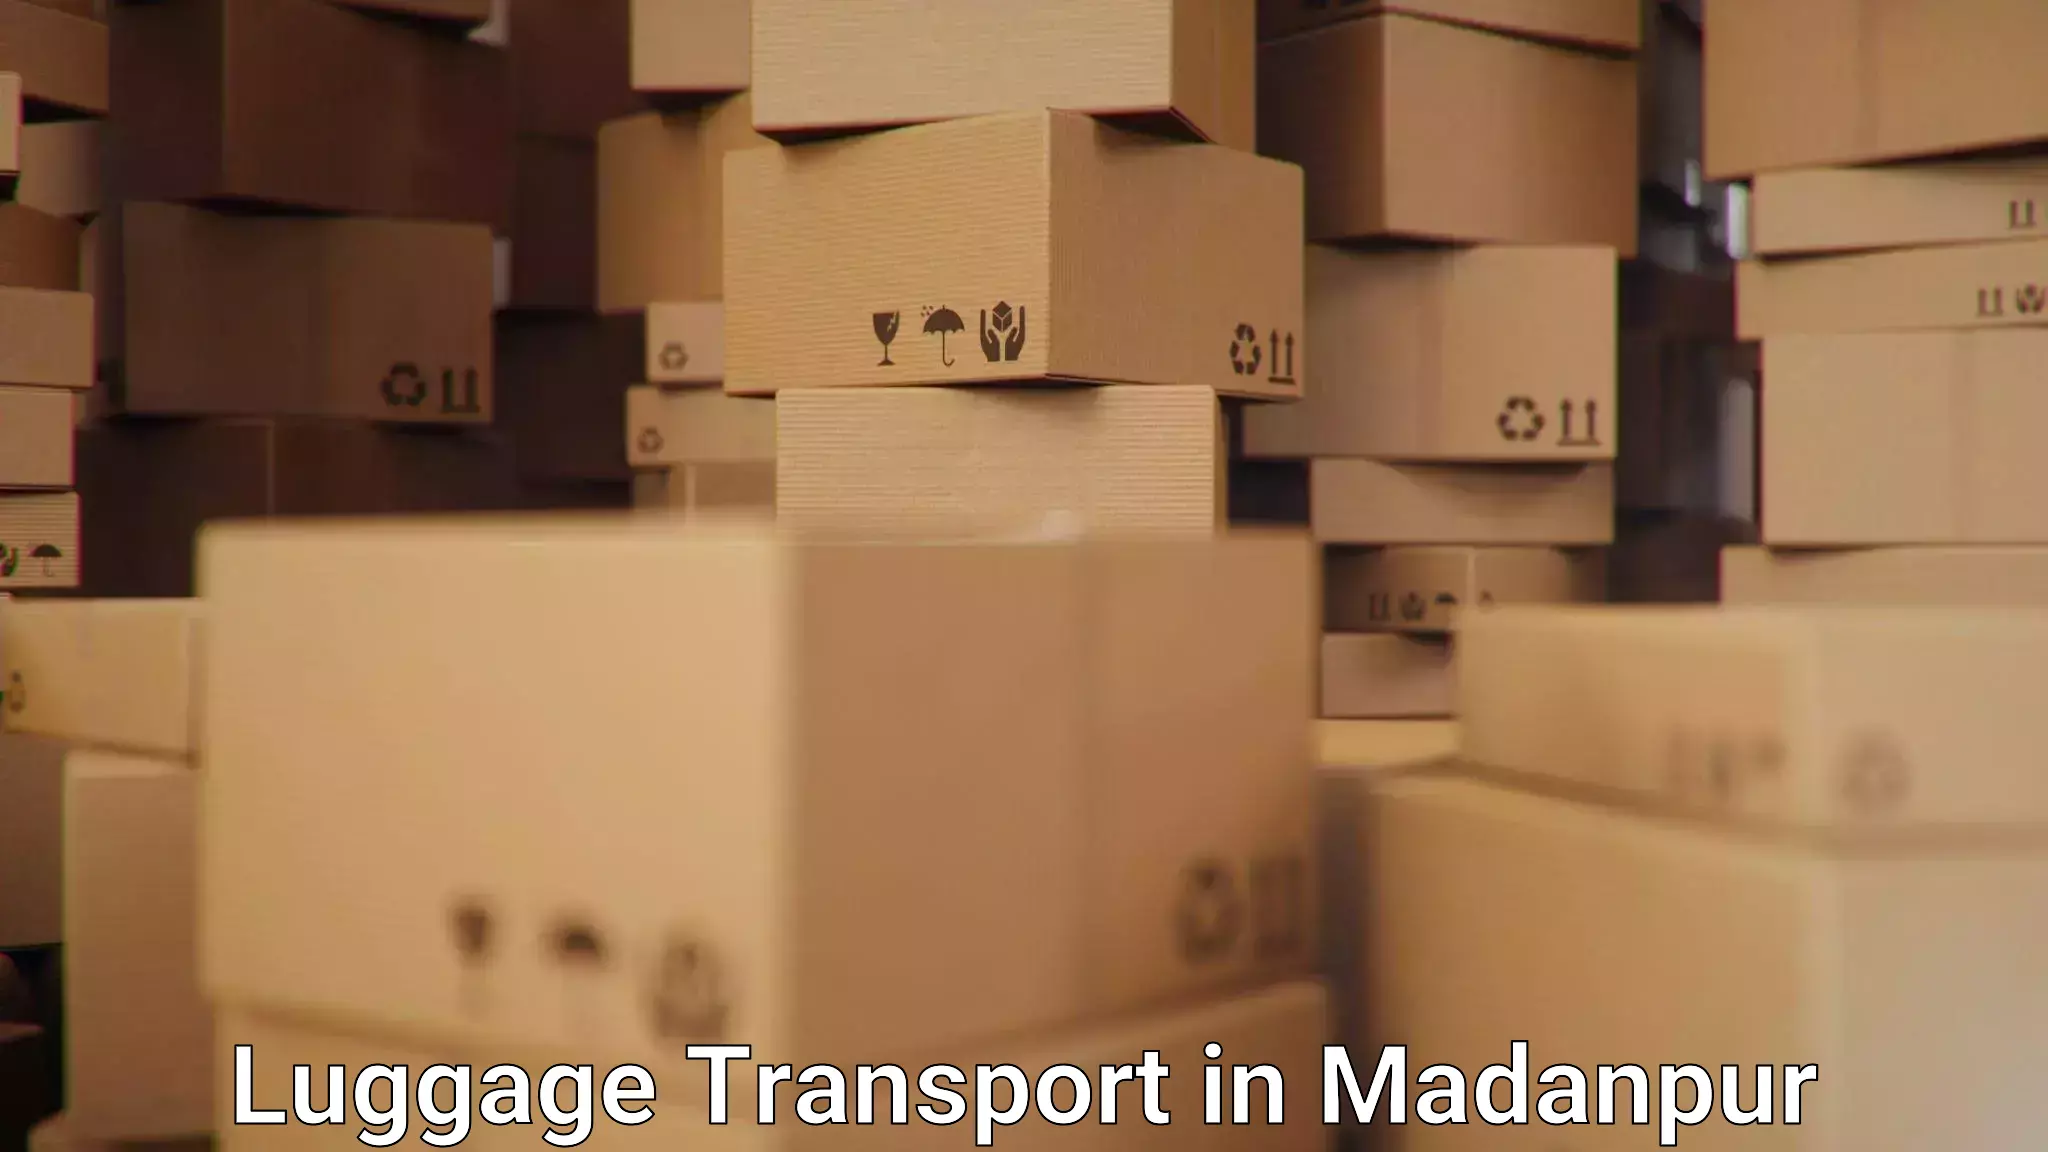 Baggage transport technology in Madanpur